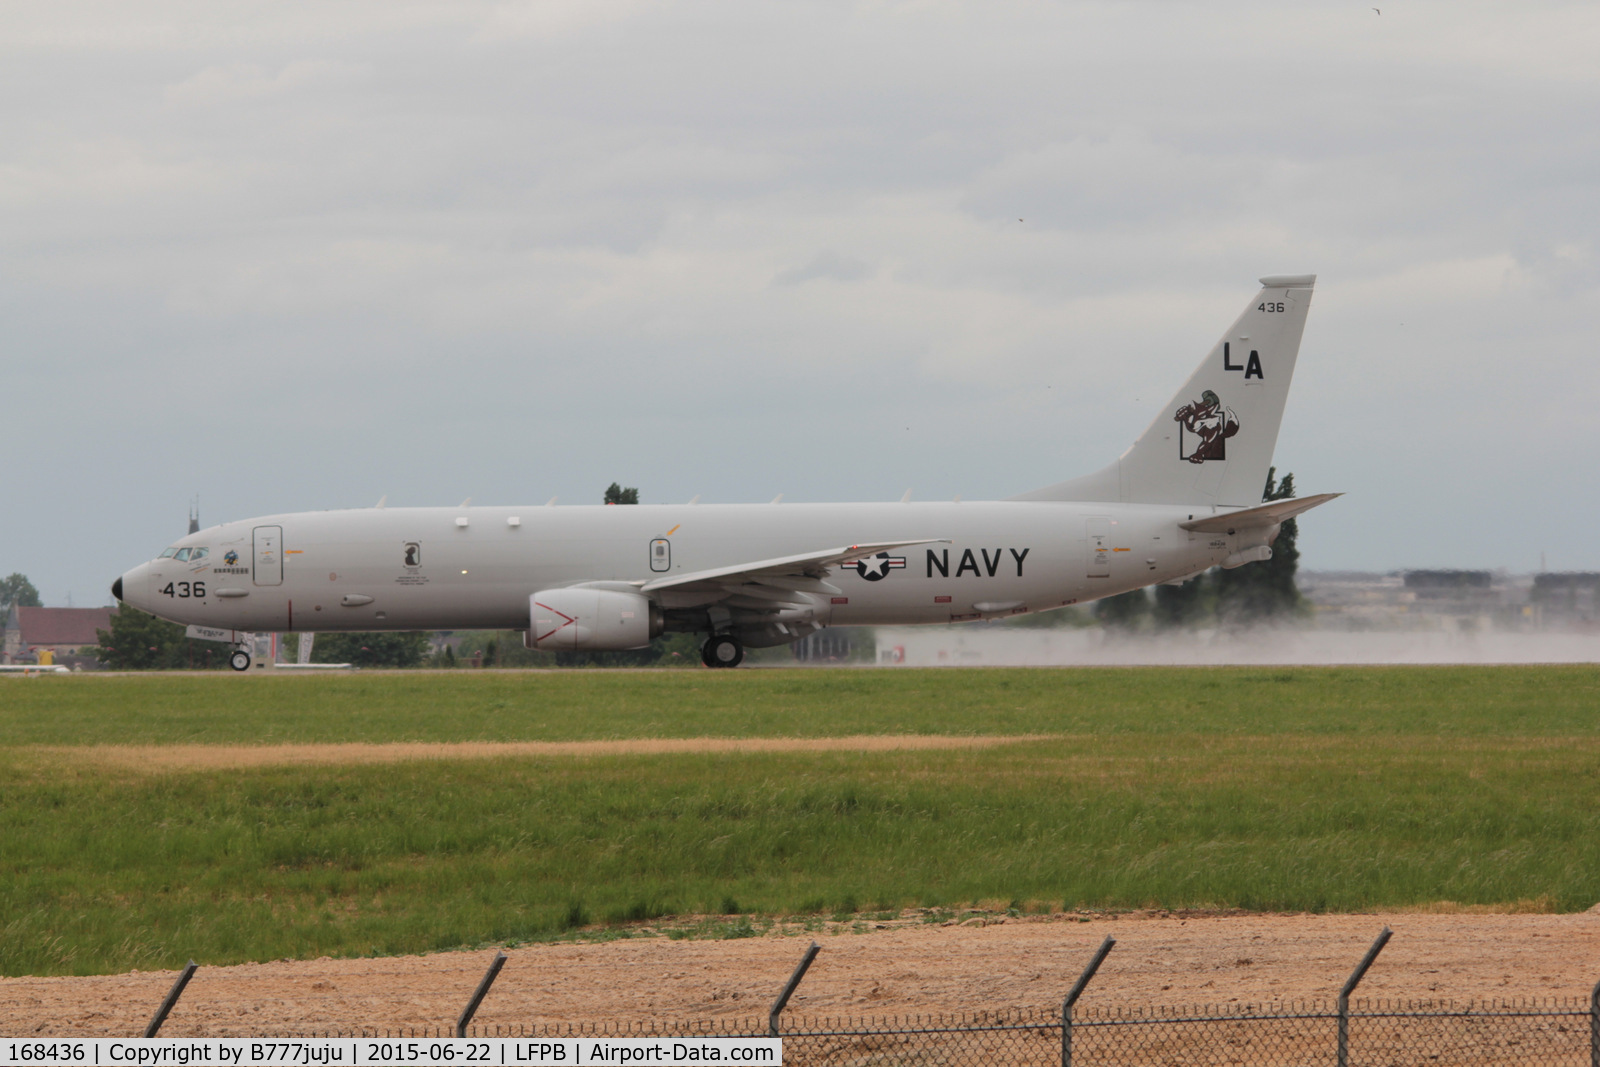 168436, 2012 Boeing P-8A Poseidon C/N 40816, at Le Bourget for SIAE 2015